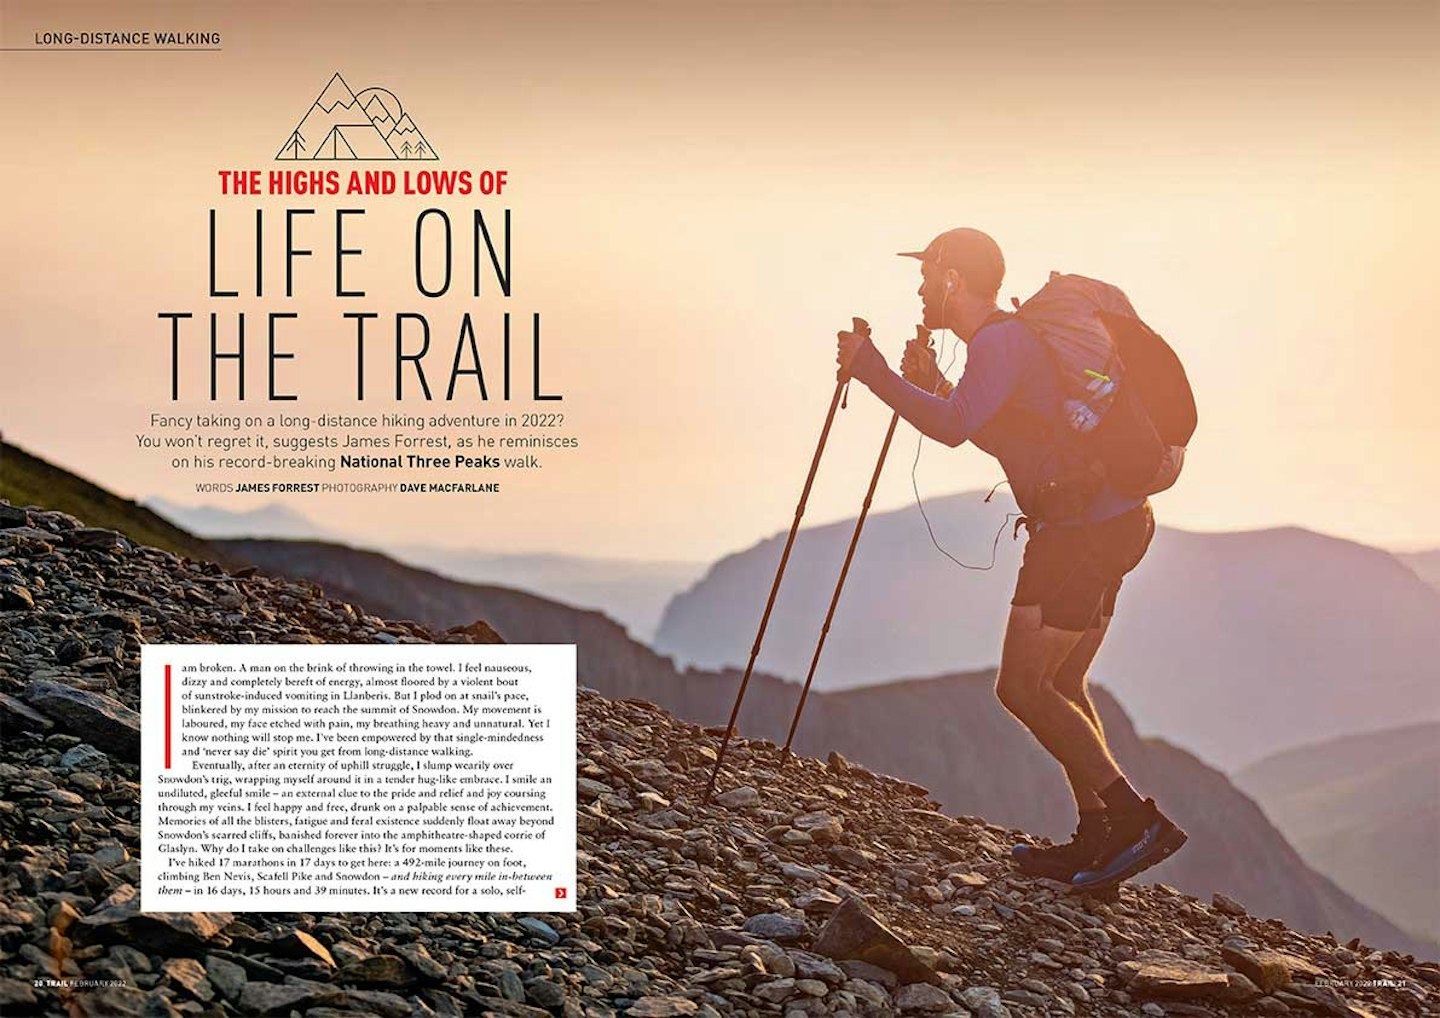 The highs and lows of life on the trail